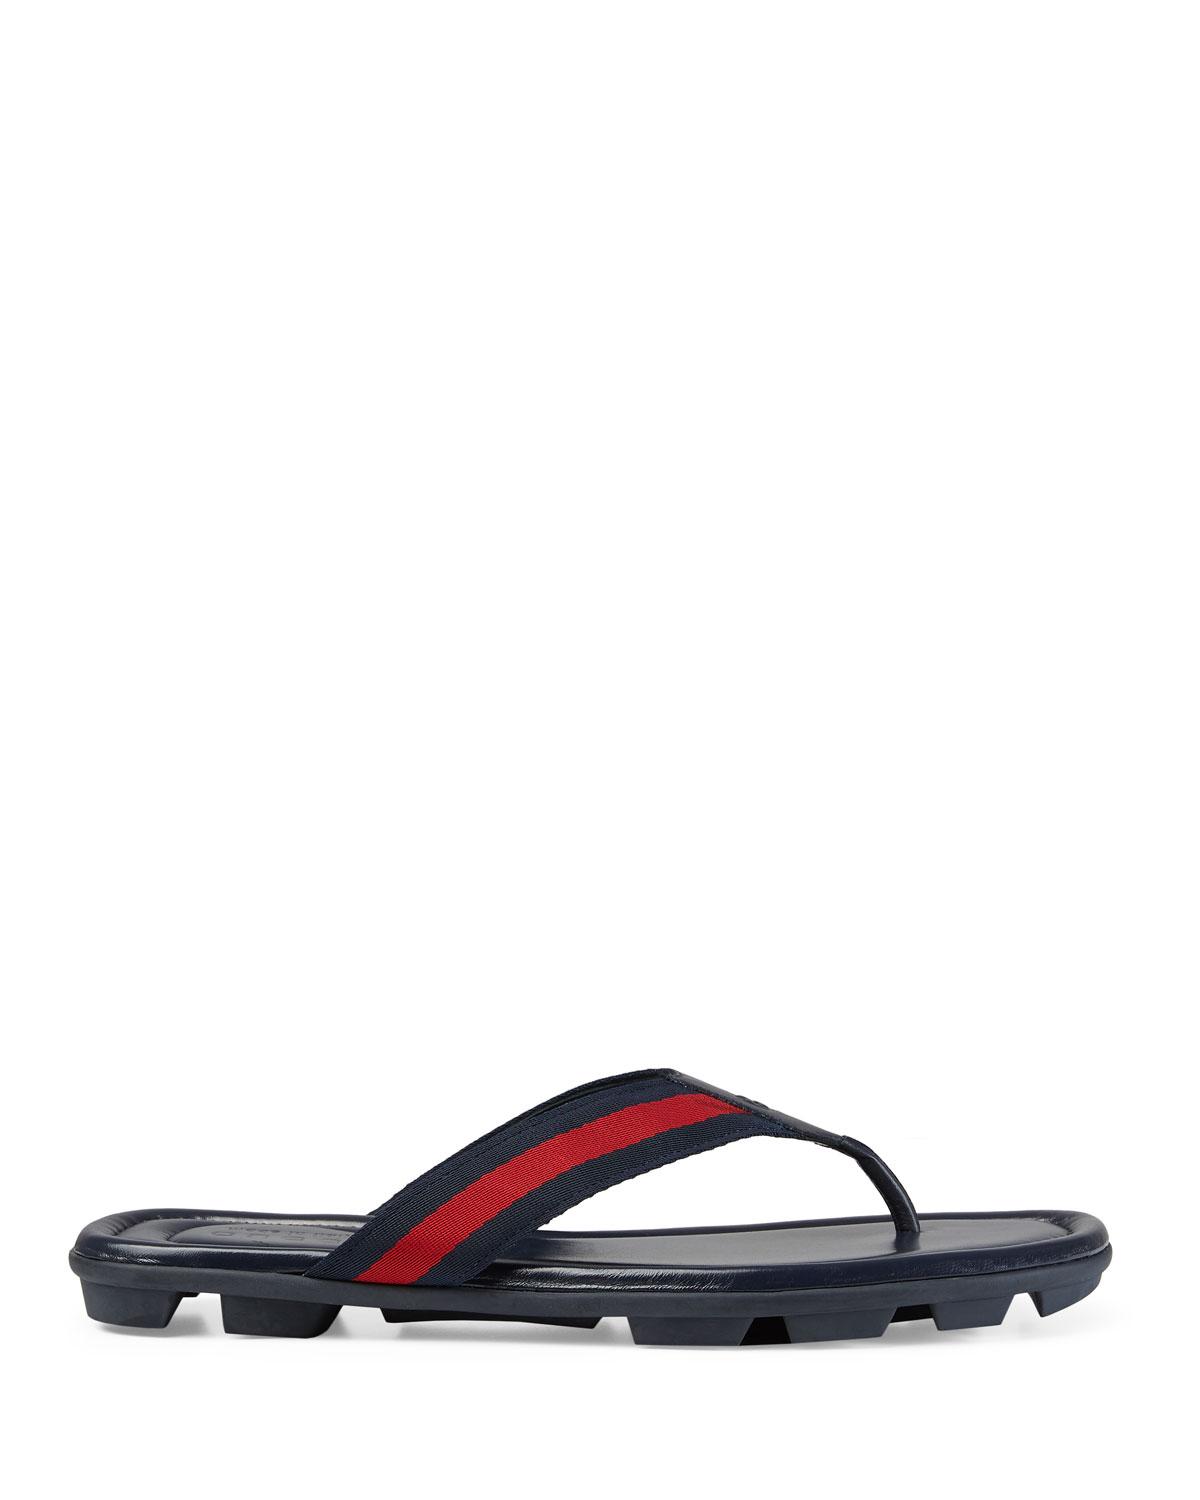 Gucci Web & Leather Thong Sandals in Green/Red (Green) for Men - Lyst